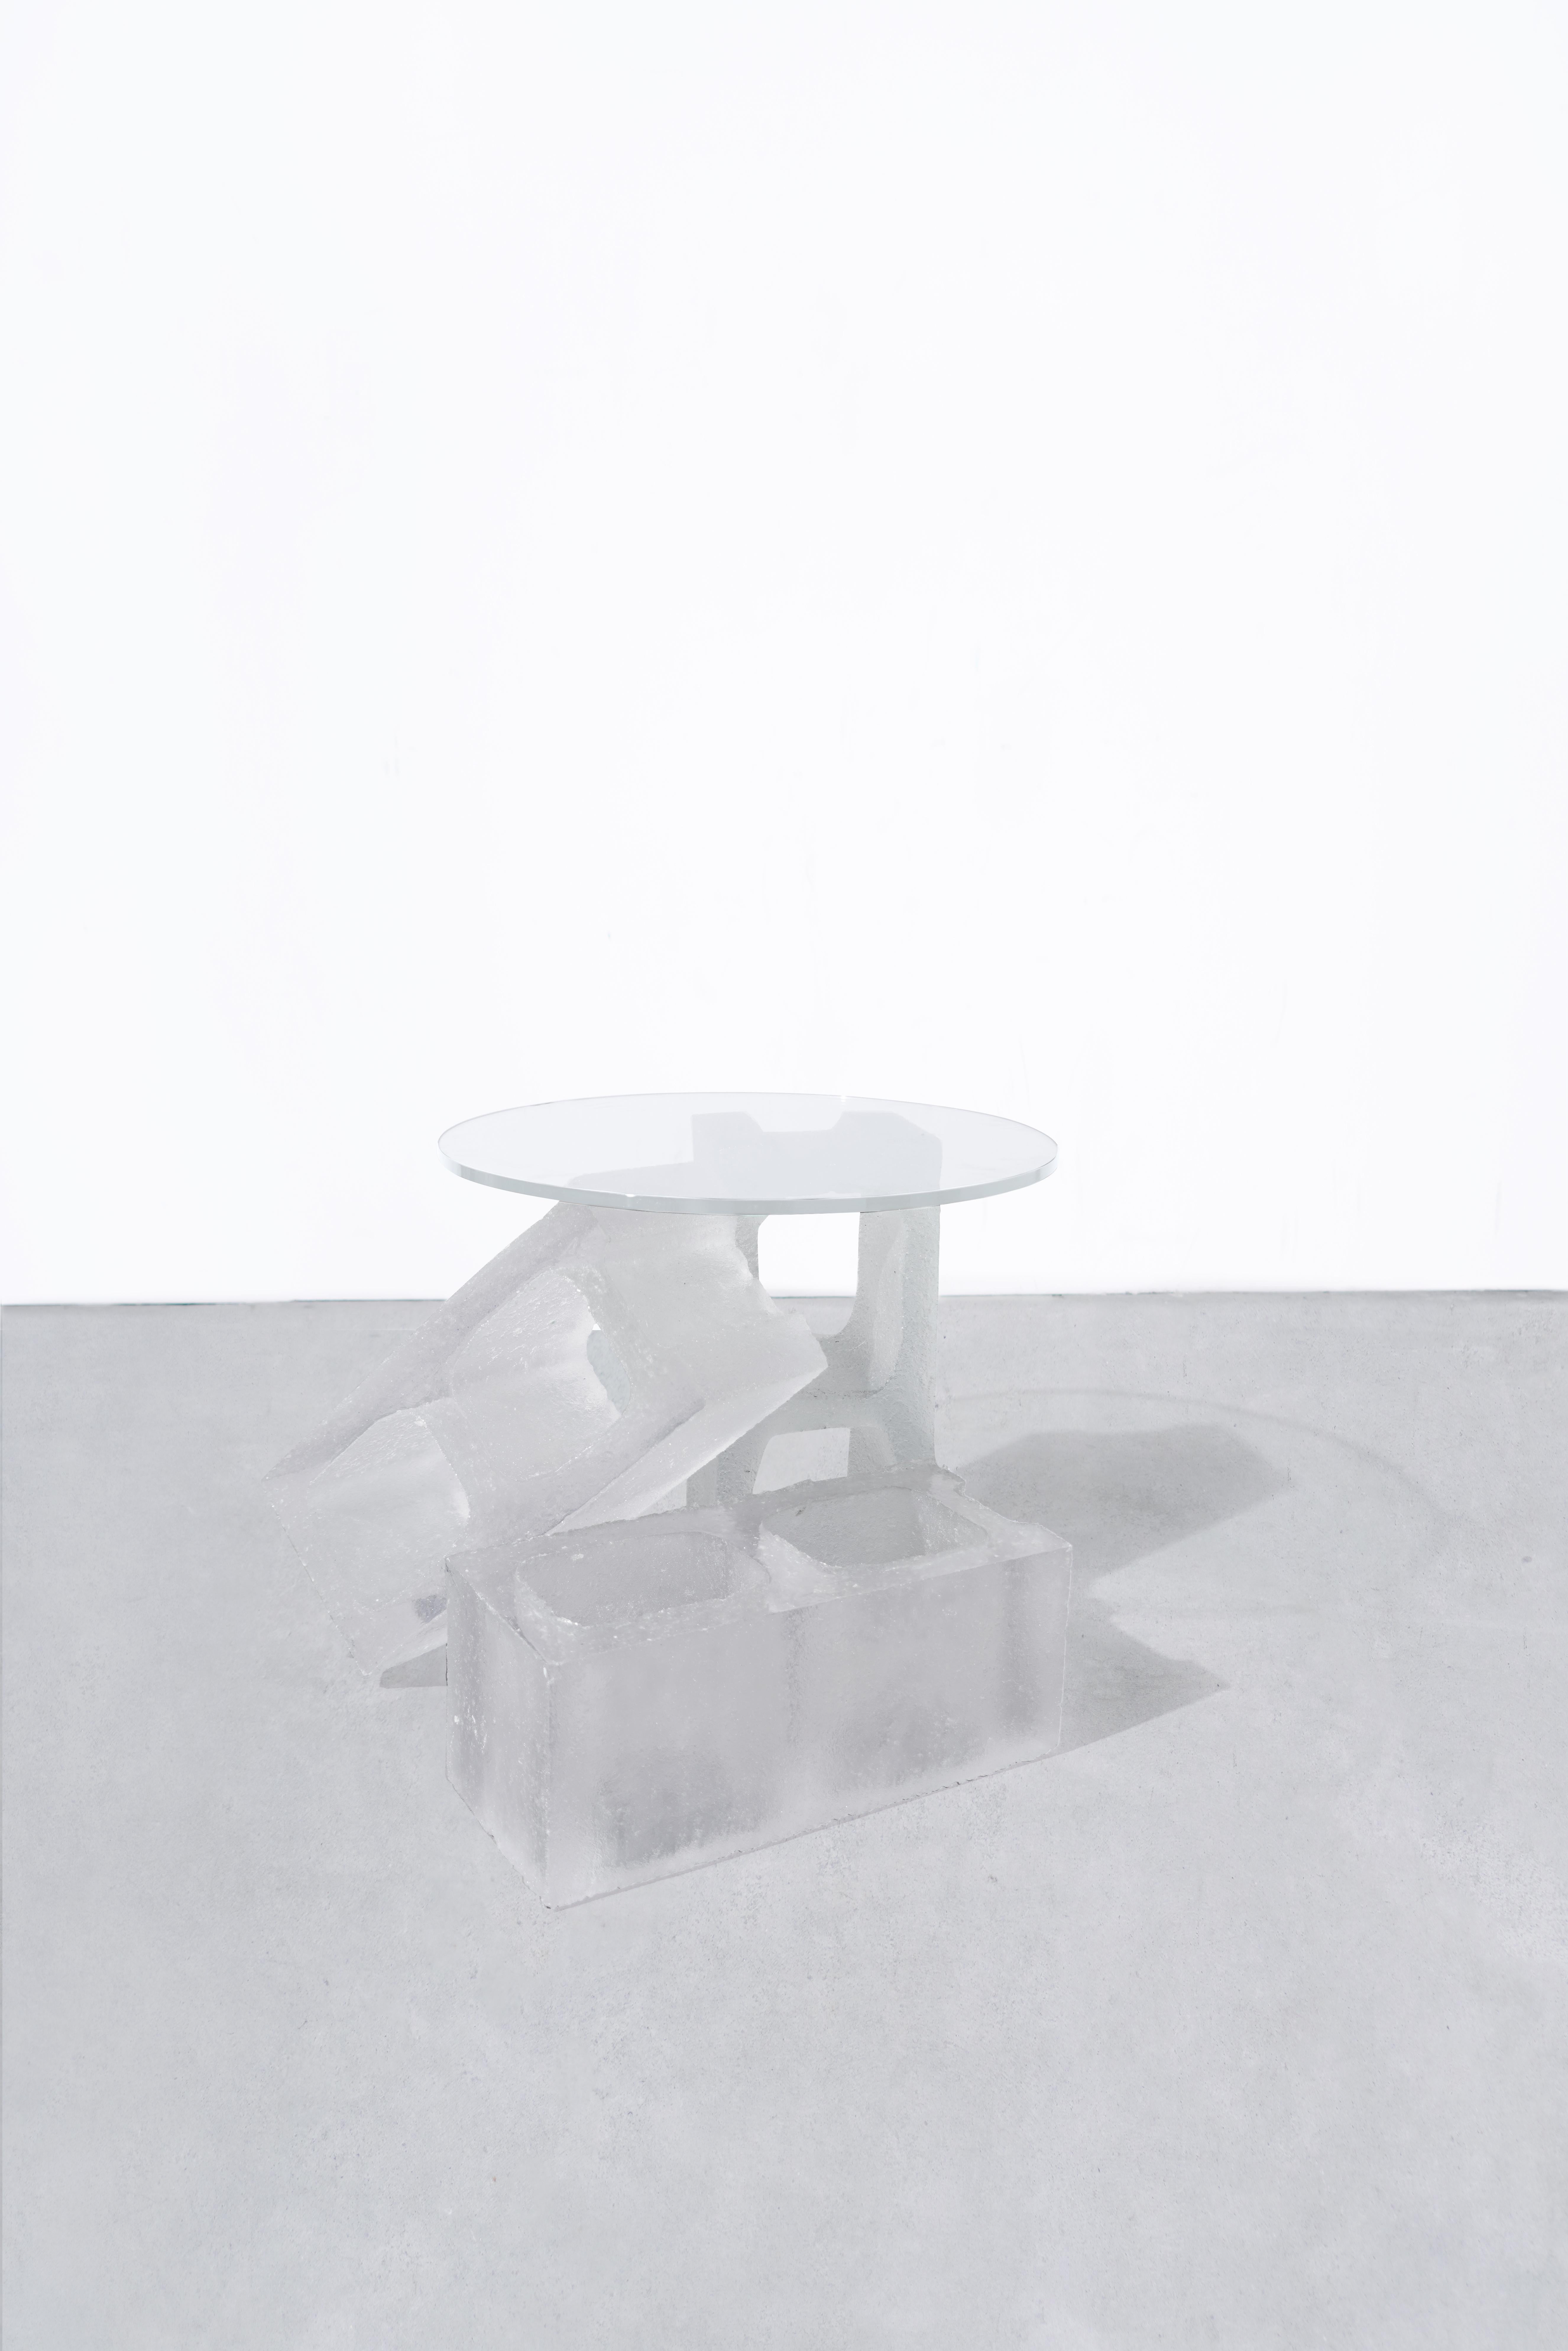 DESCRIPTION
3 hand-molded, transparent resin cinder block, supporting a tempered glass table top.
Starphire glass top.
Modular.
Made to order in nyc.

DIMENSIONS
Cinder Block length 18.75?
Cinder block width 7.5” 
Cinder block thickness